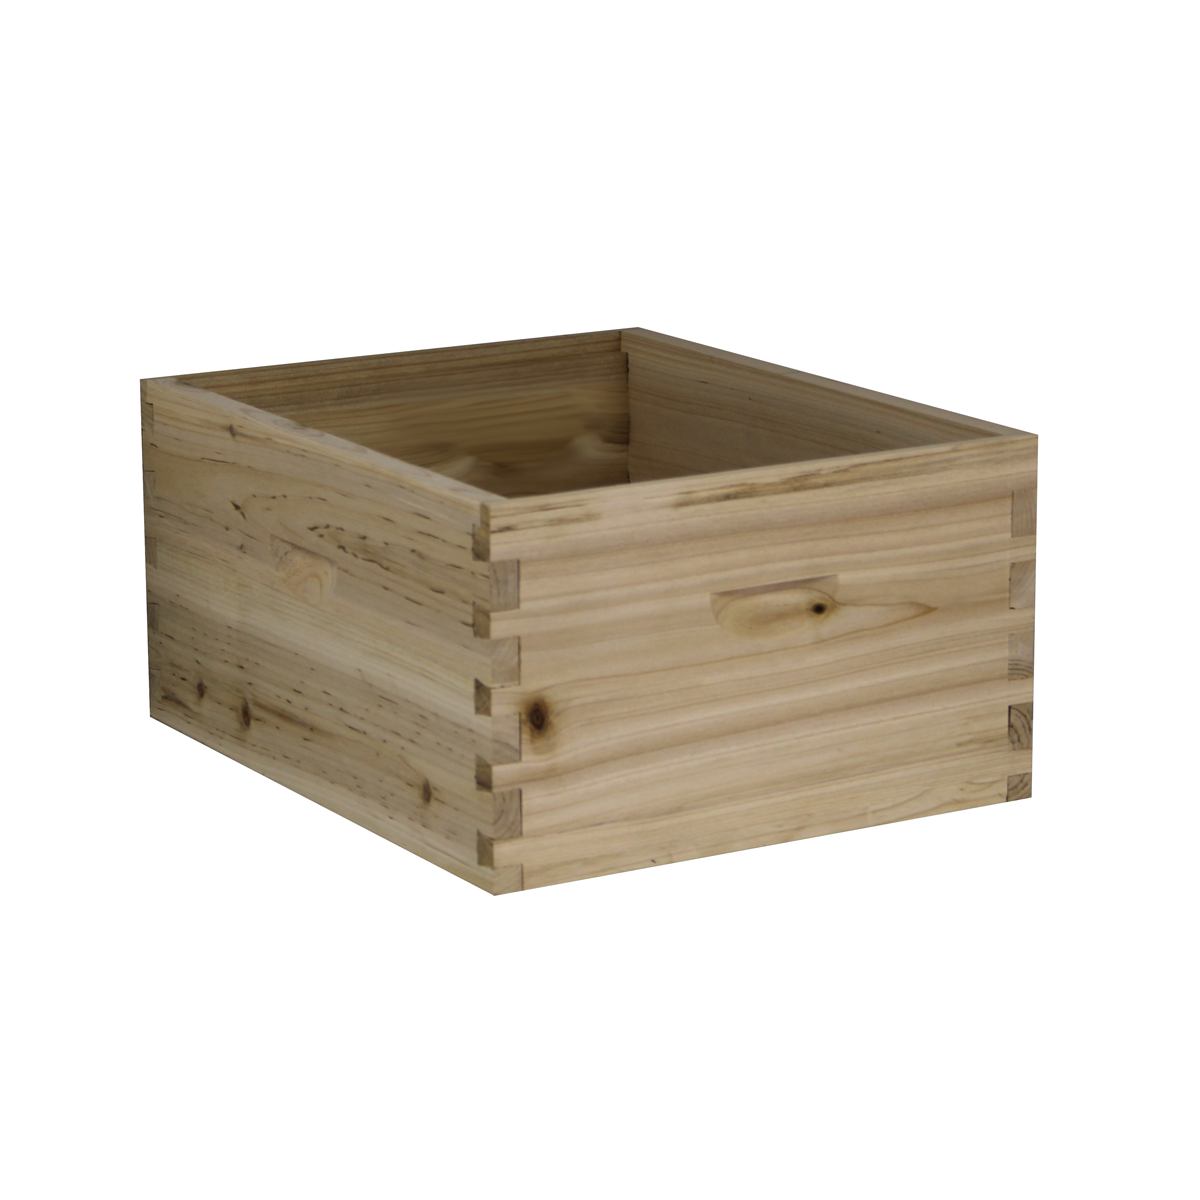 10 Frame Deep Brood Box w/ Dovetail Joints (Painted & Assembled)